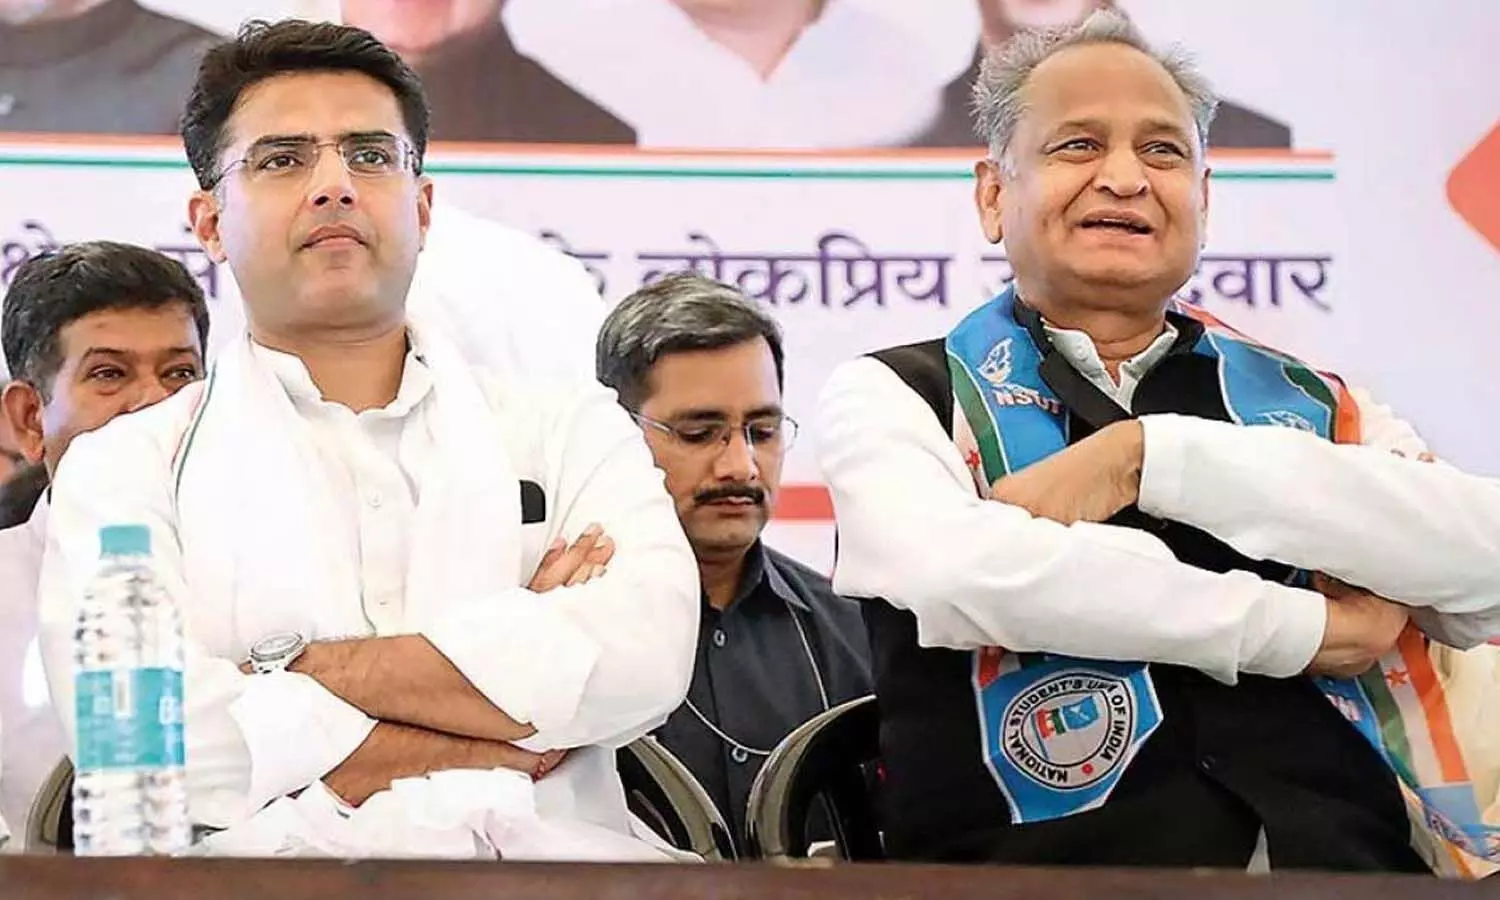 Congress leadership embroiled in the fight between Gehlot and Pilot, it is not easy to take a tough decision in Rajasthan